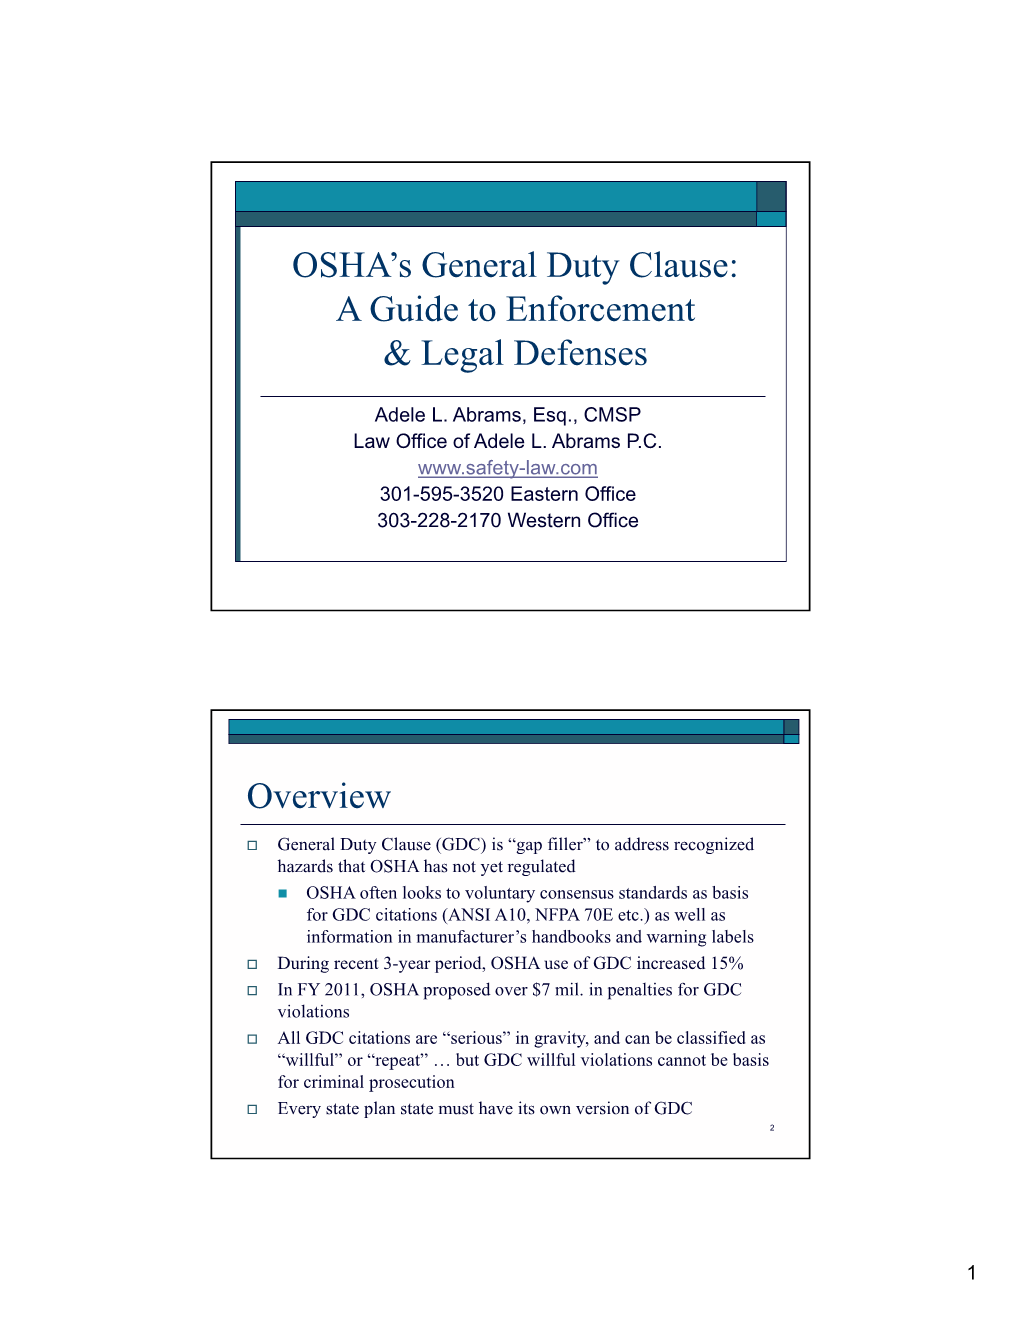 OSHA's General Duty Clause: a Guide to Enforcement & Legal Defenses